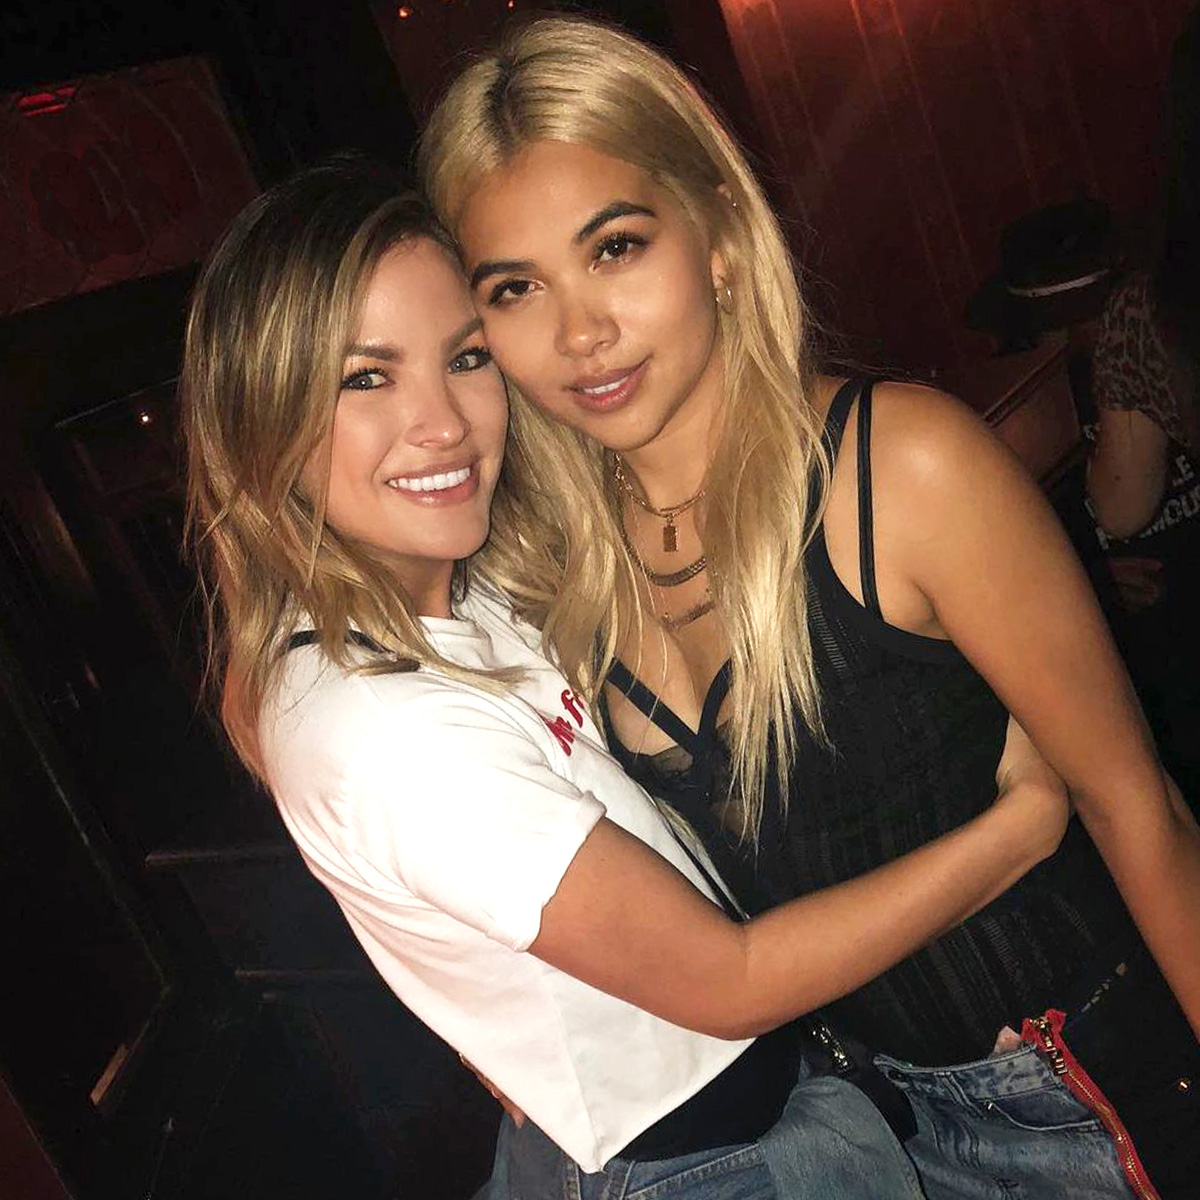 https://akns-images.eonline.com/eol_images/Entire_Site/2022421/rs_1200x1200-220521120333-1200.Becca-Tilley-Hayley-Kiyoko-IG4.jpg?fit=around%7C1080:540&output-quality=90&crop=1080:540;center,top